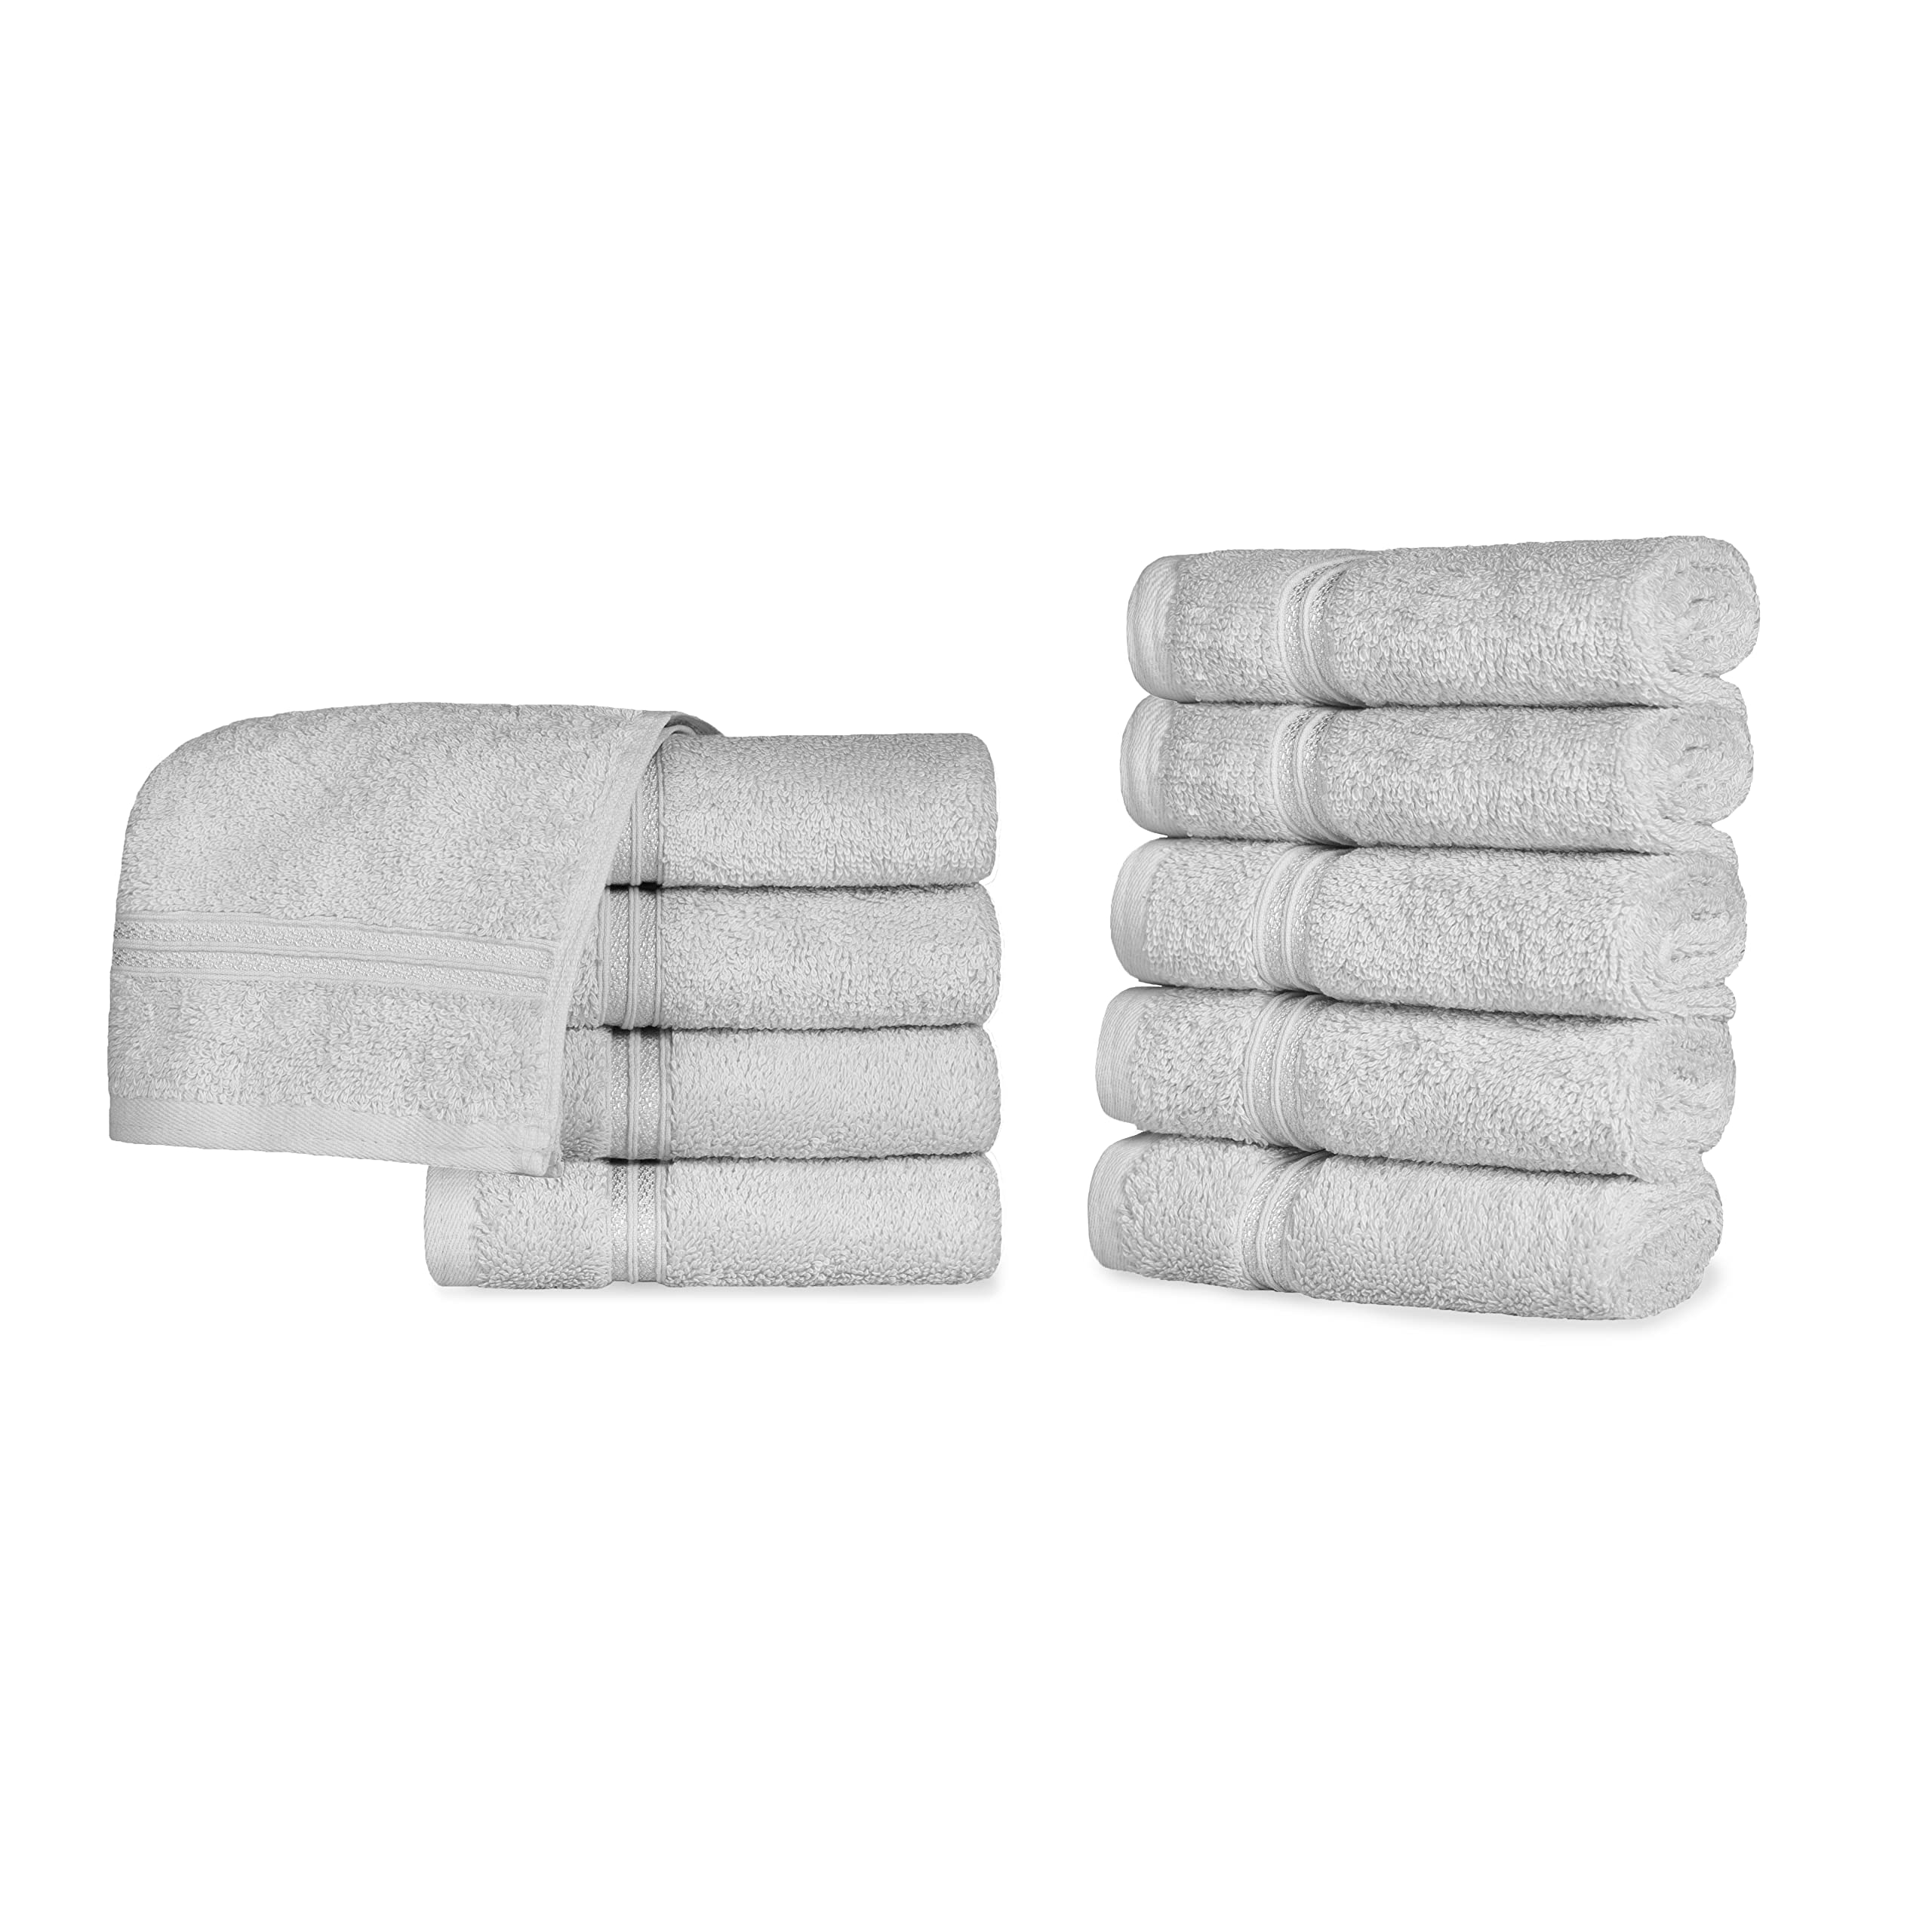 SUPERIOR Egyptian Cotton 10-Piece Face Towel Set, Small Towels for Facial, Spa, Quick Dry, Absorbent Towels, Bathroom Accessories, Guest Bath, Home Essentials, Washcloth, Airbnb, Silver